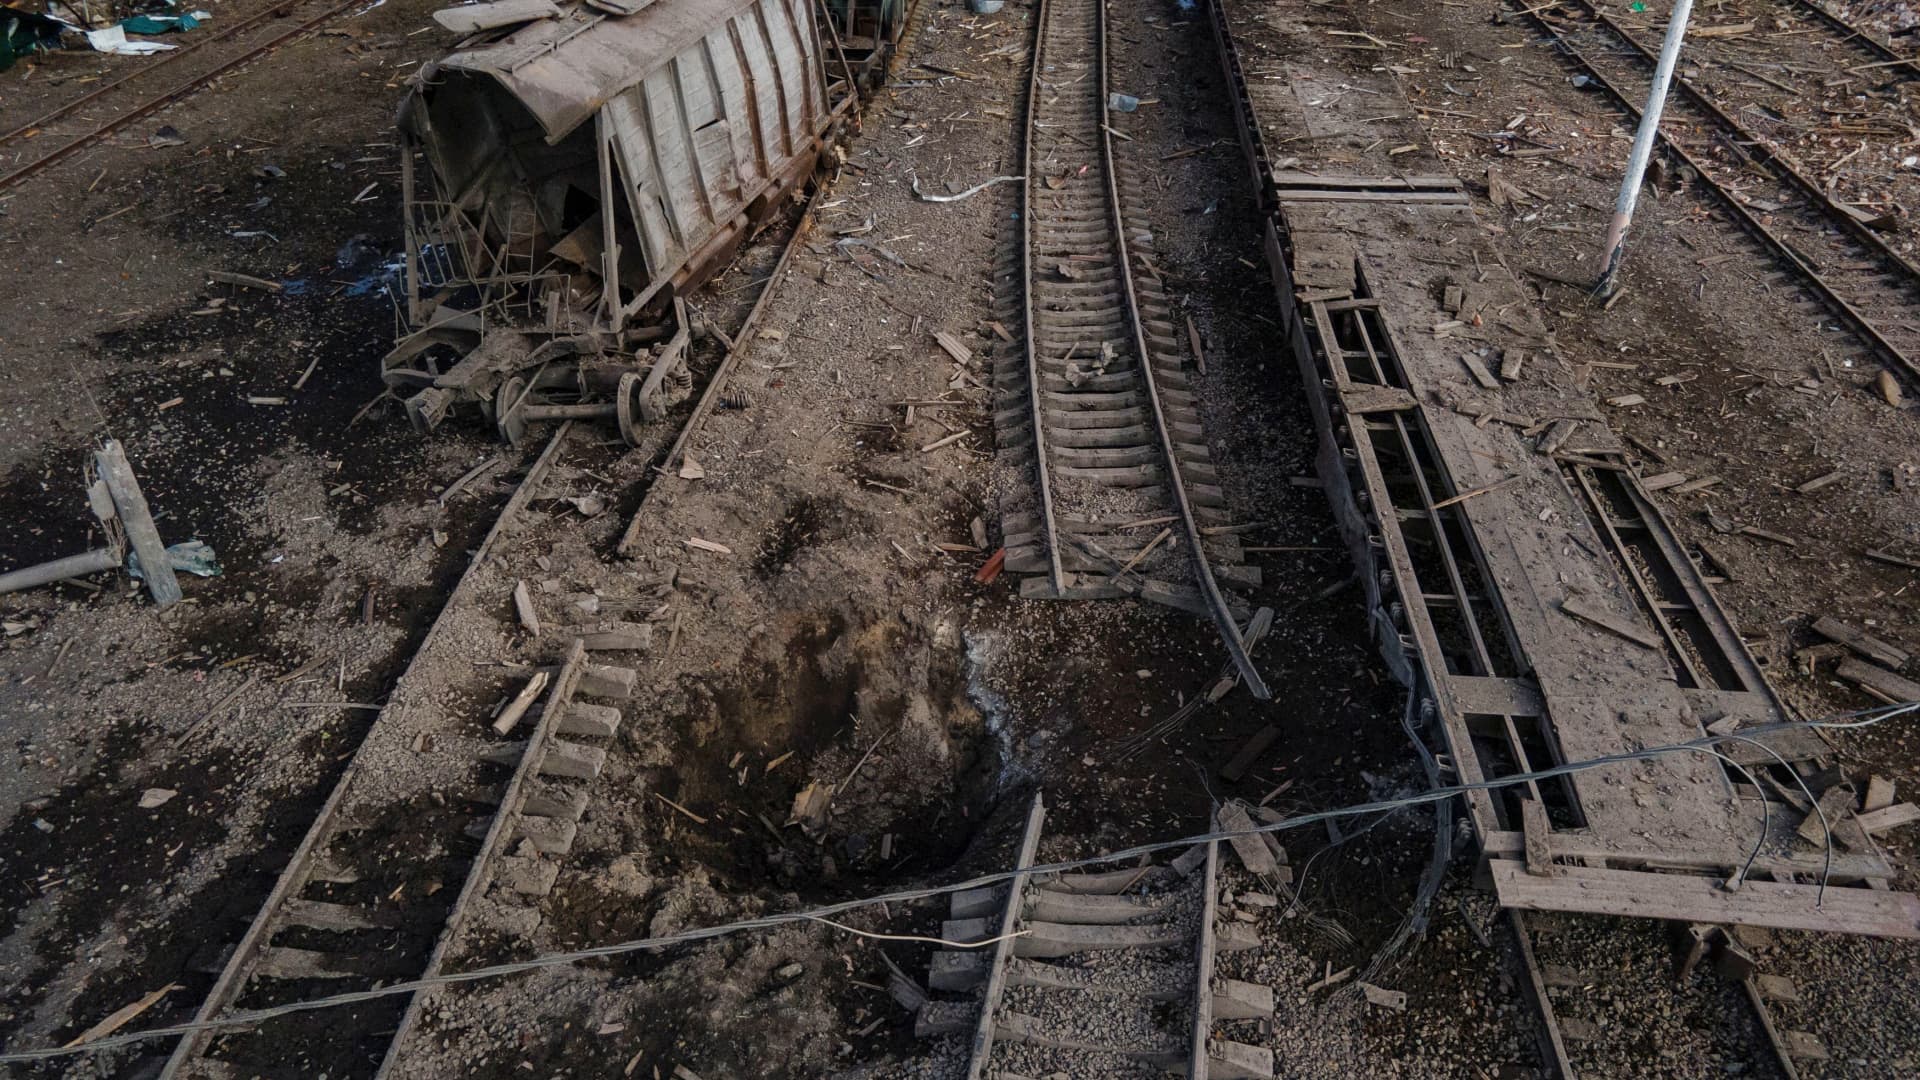 A view shows a bomb crater after an air strike, as Russia's attack on Ukraine continues, at a railway station in the town of Okhtyrka, in the Sumy region, Ukraine March 14, 2022.